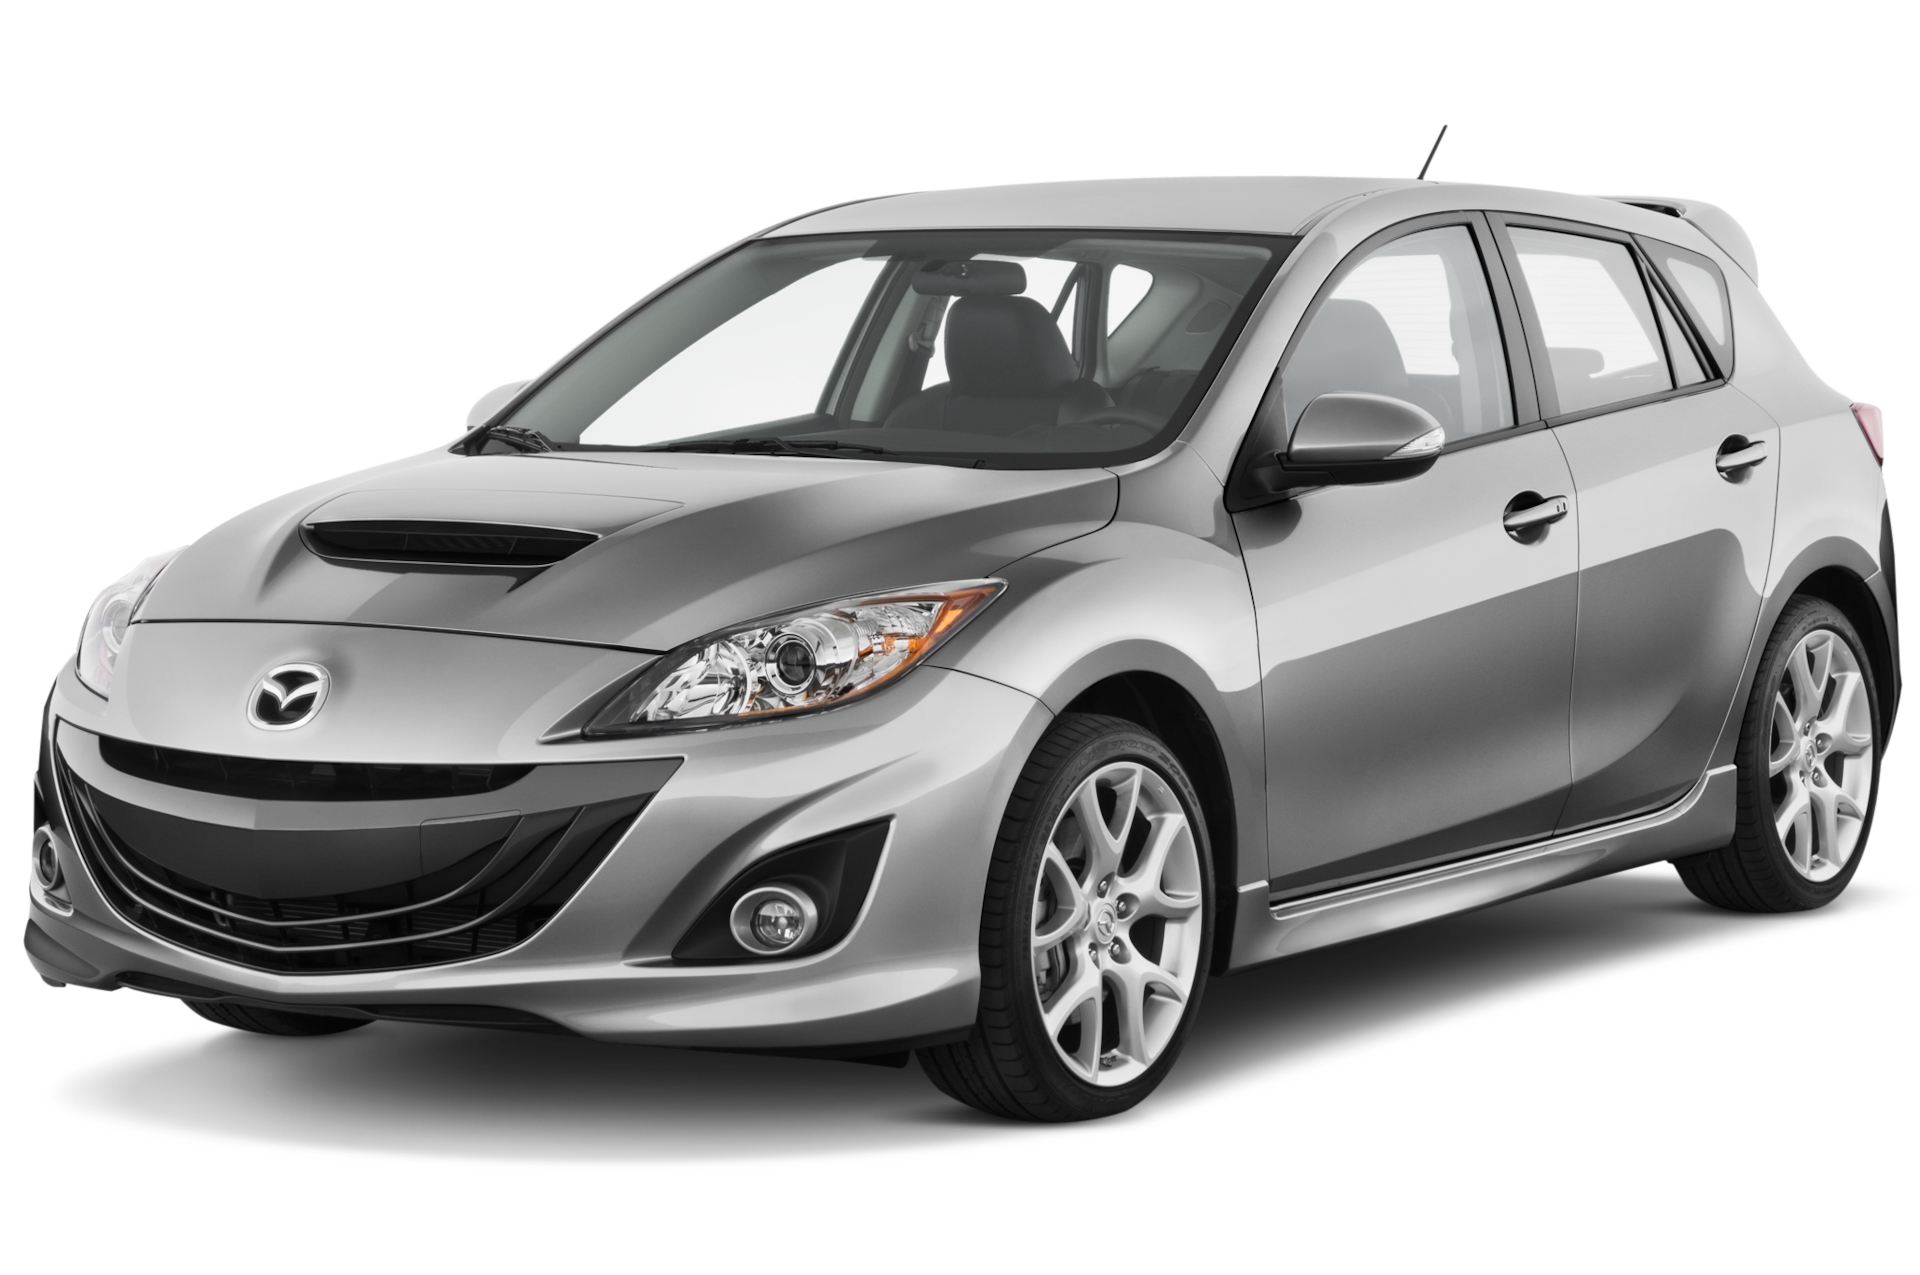 2013 Mazda MAZDASPEED3 Prices, Reviews, and Photos - MotorTrend